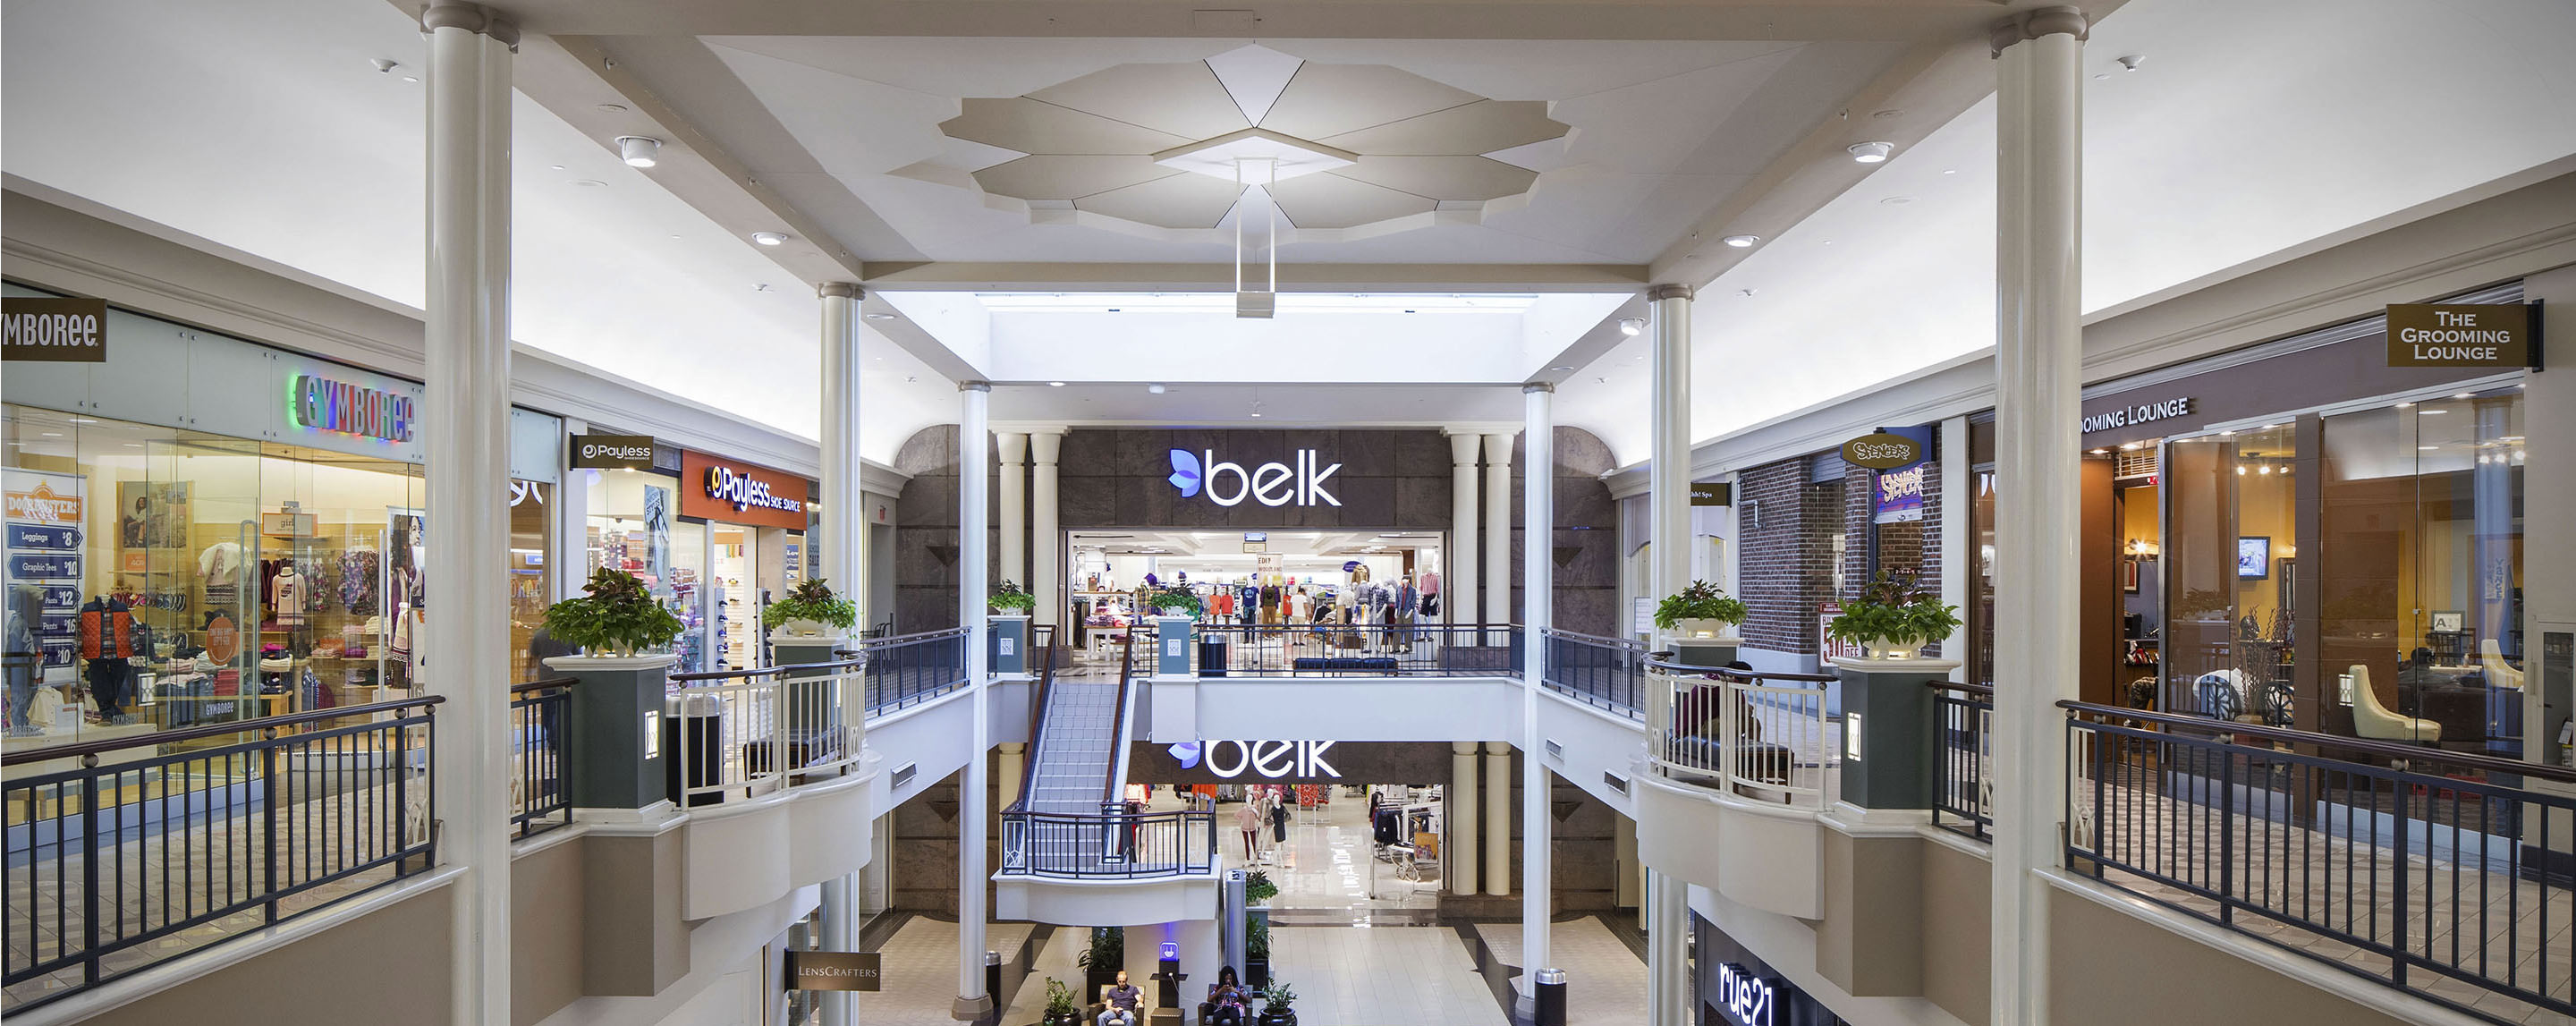 Interior shot of a mall showing two stories. The image is centered on Belk.